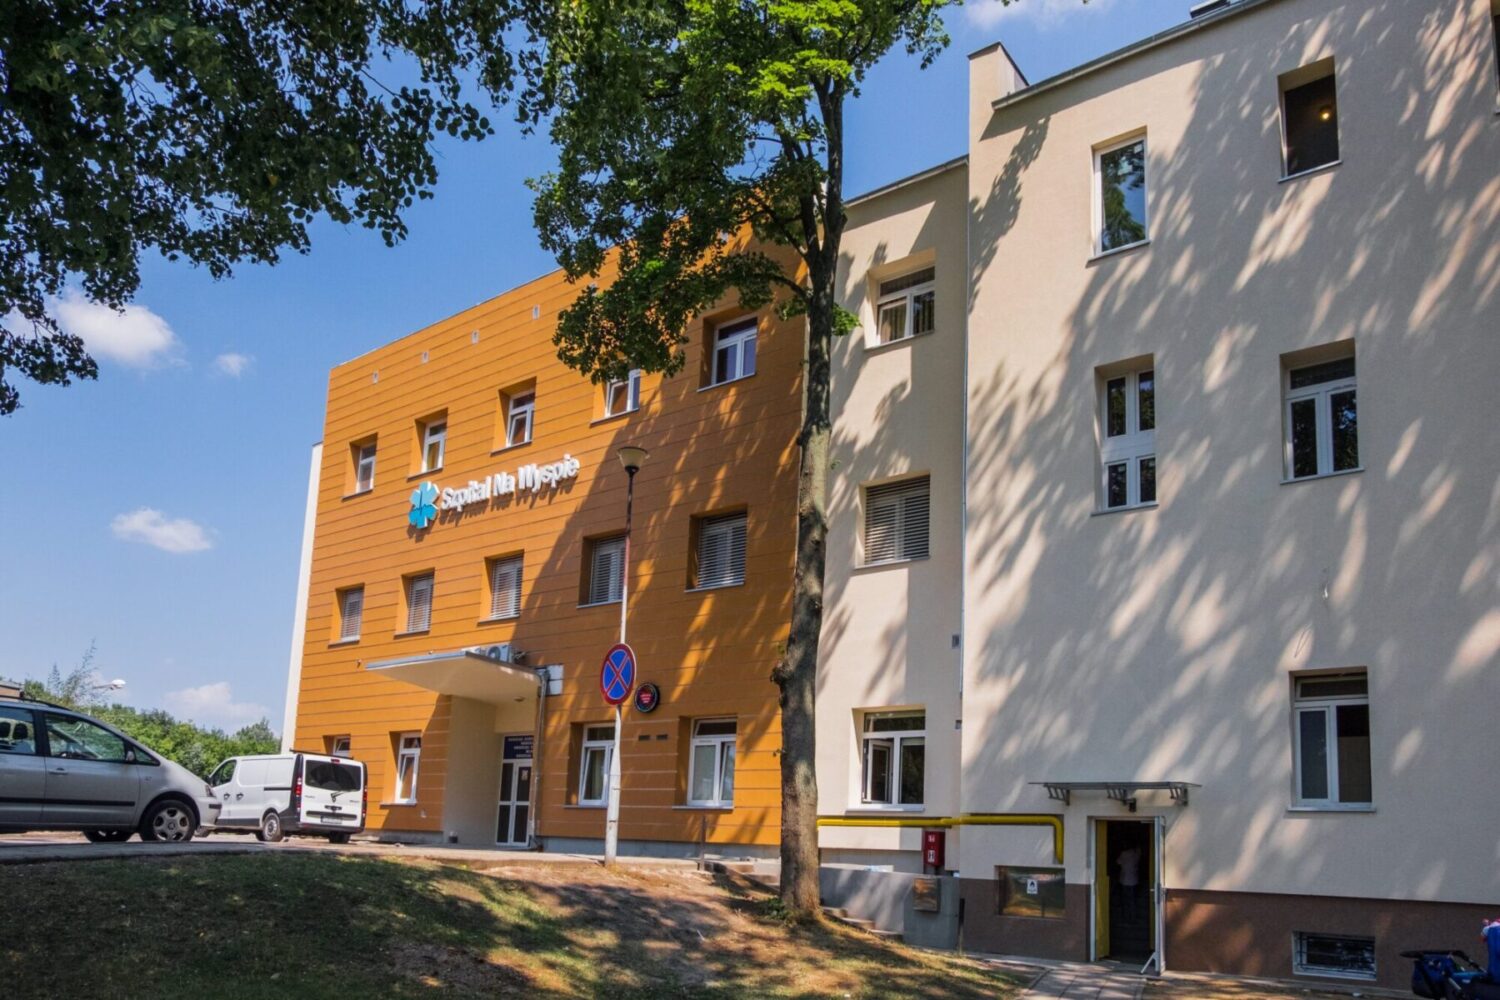 Extension of Pavilion 2 at the “Szpital na Wyspie” Hospital in Żary